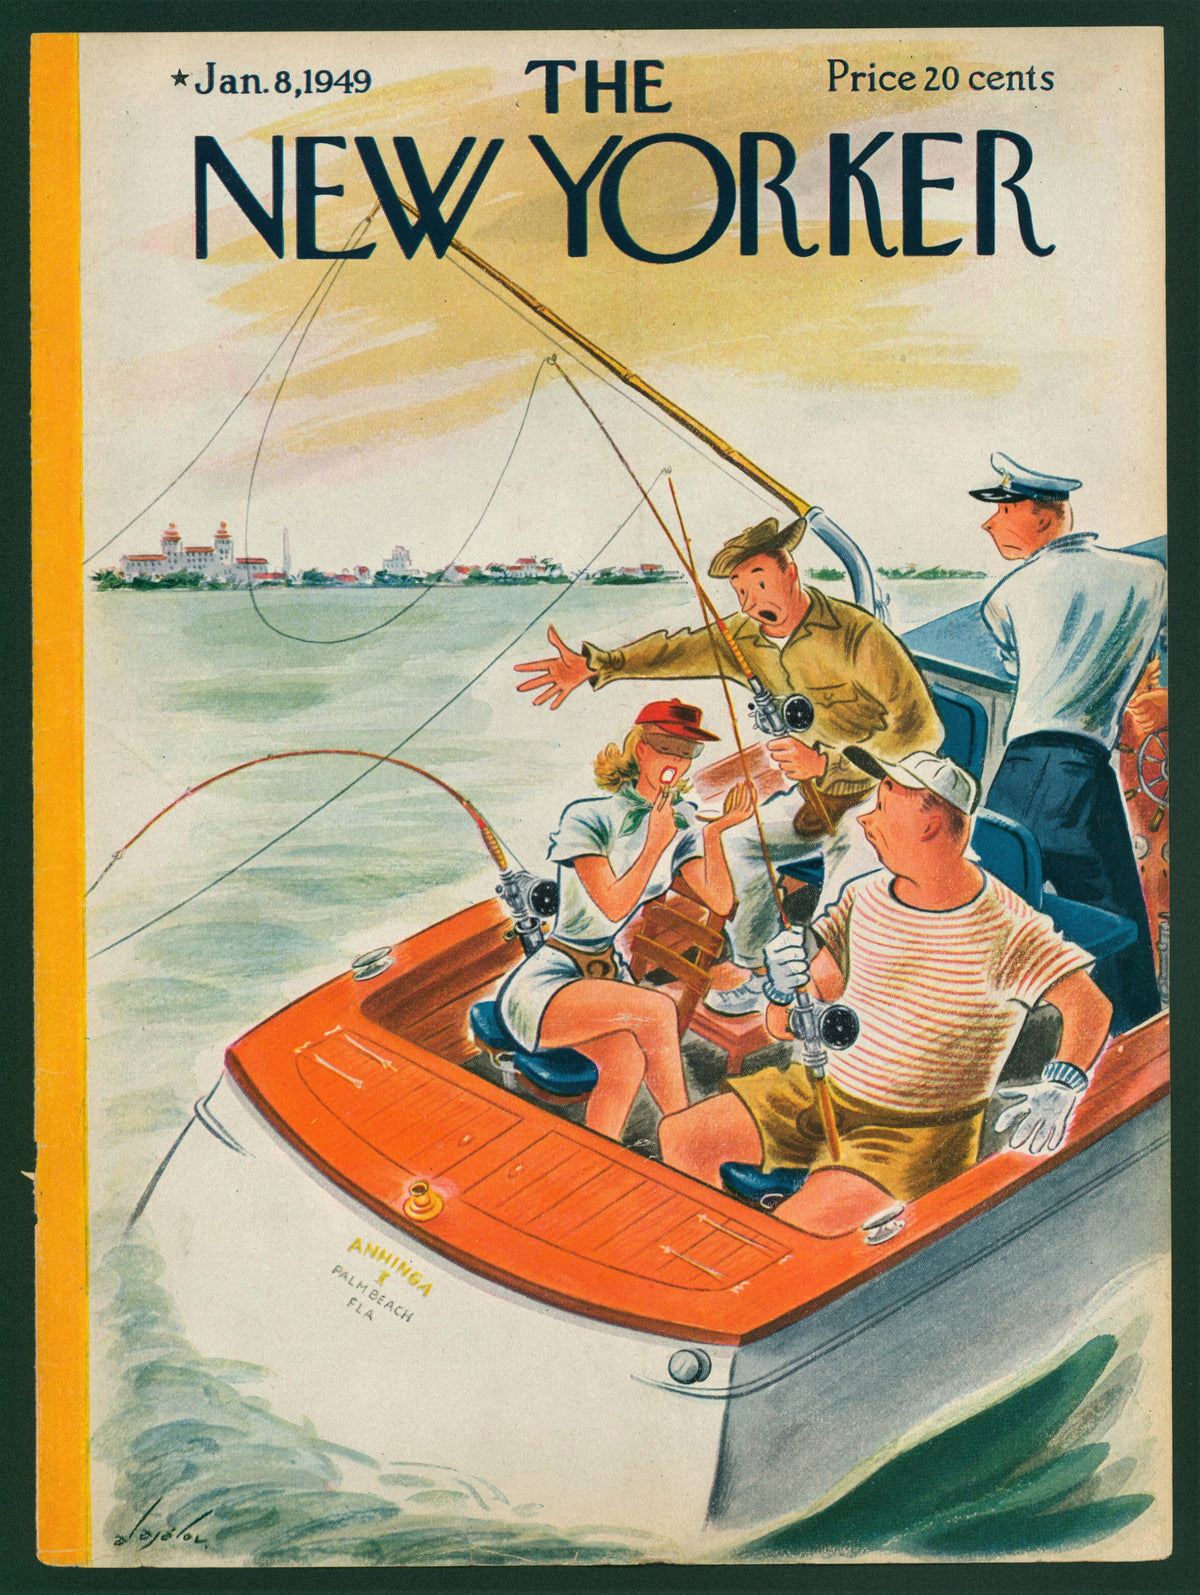 Going Fishing- The New Yorker - Authentic Vintage Antique Print